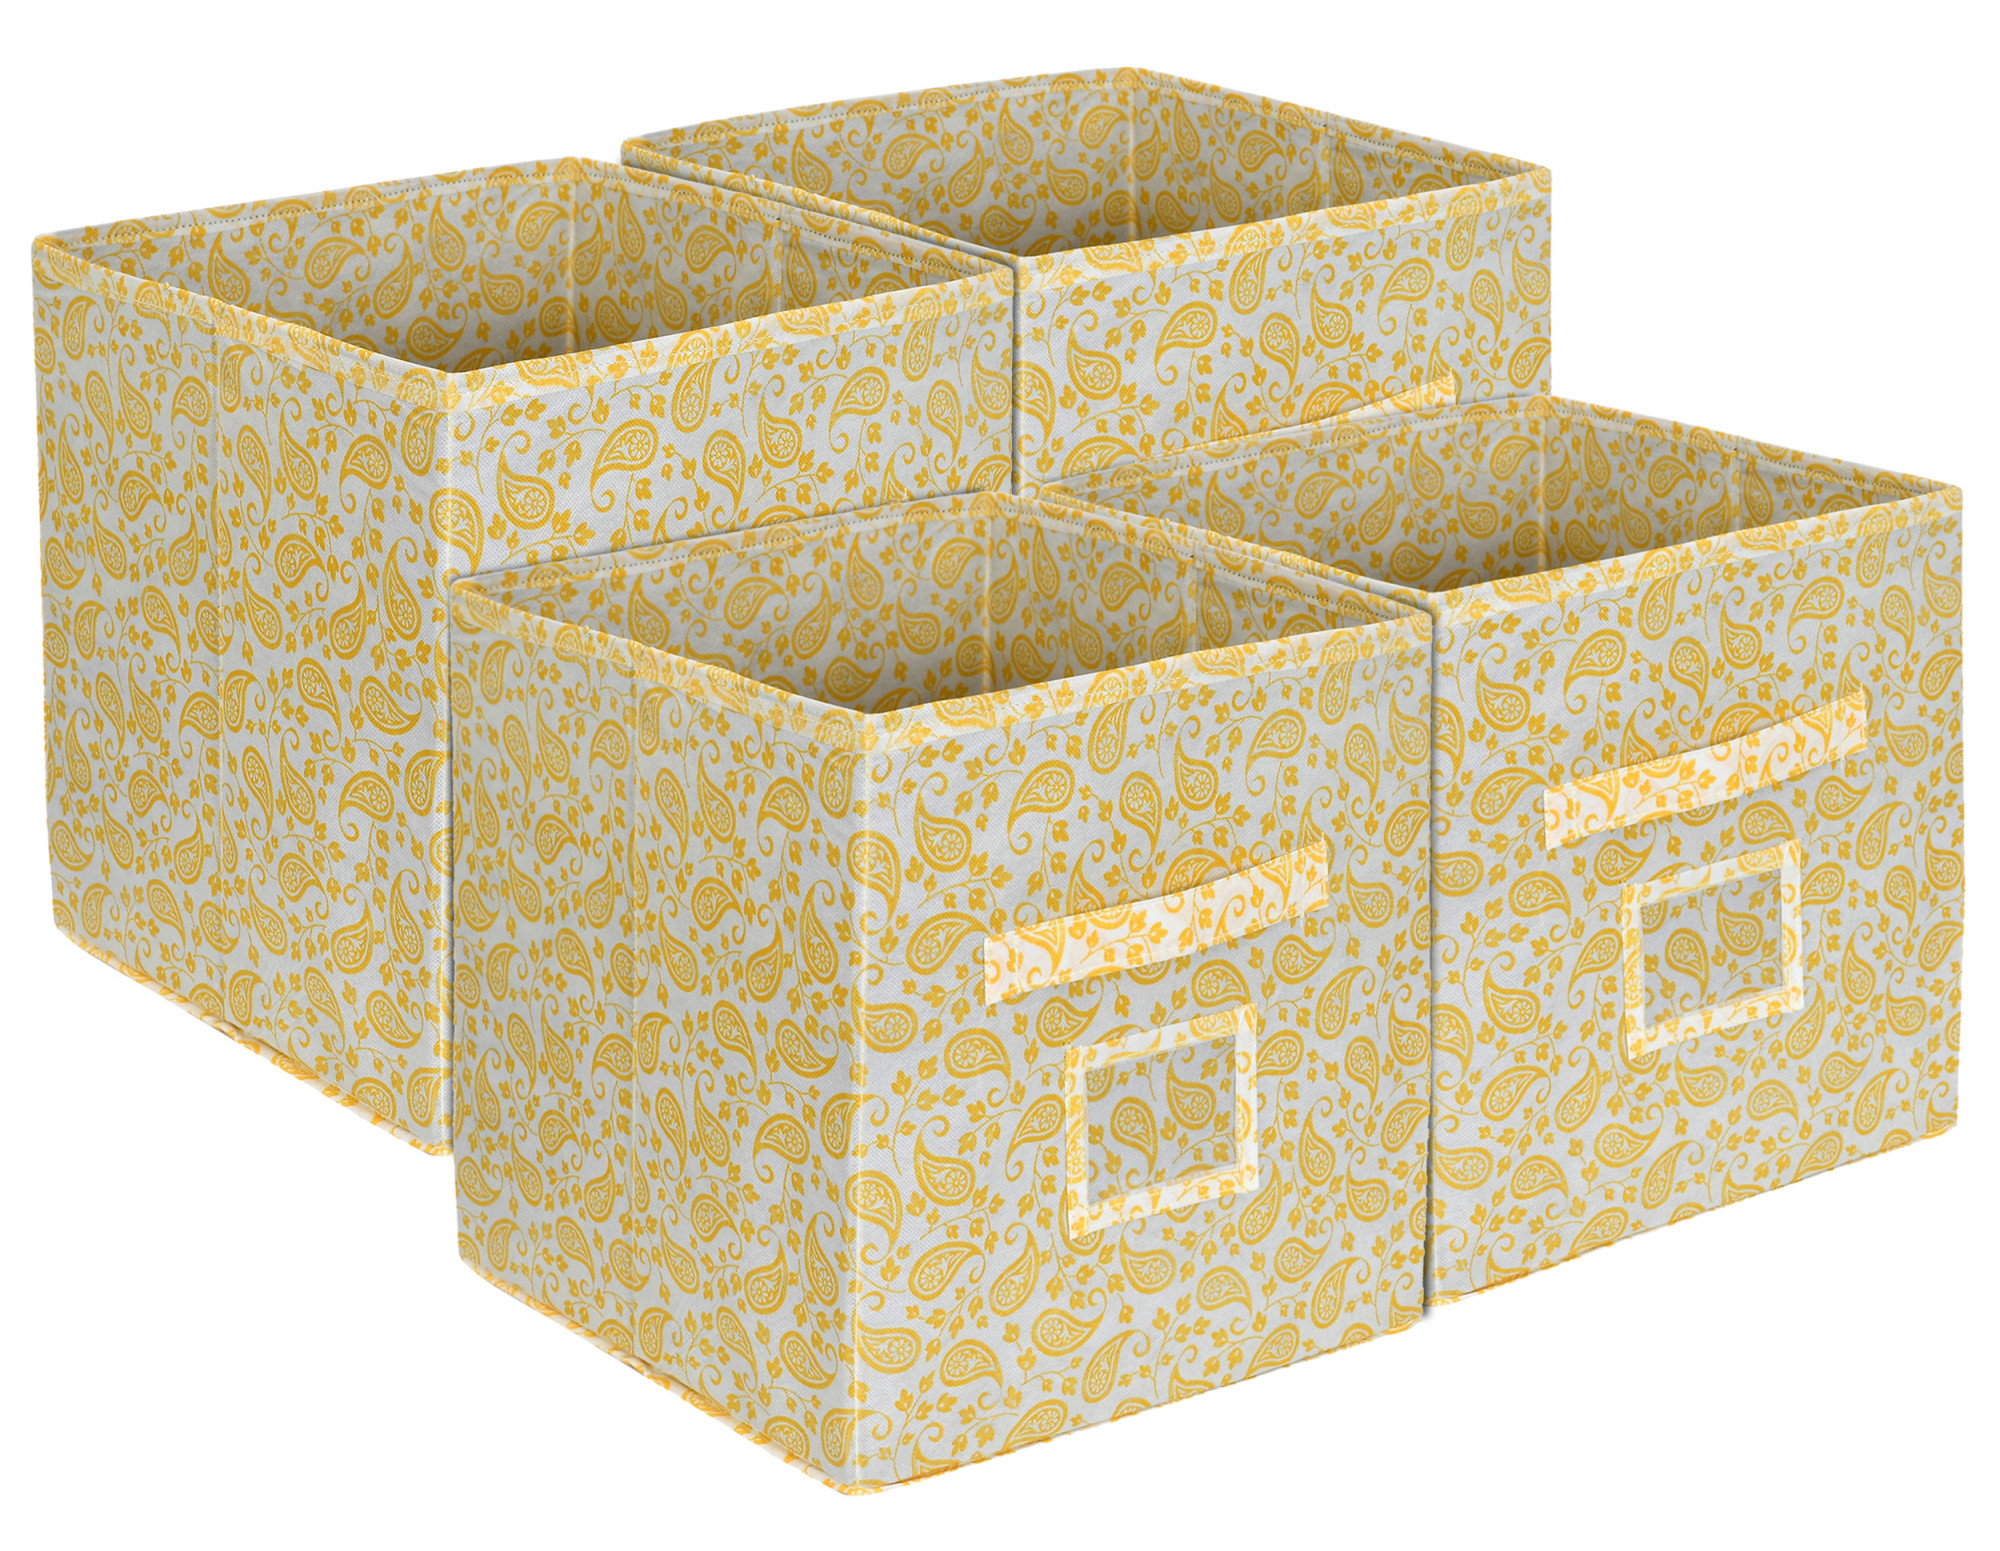 Kuber Industries Metalic Print Non Woven Fabric Foldable Storage Cube Toy,Books,Shoes Storage Box With Handle,Extra Large (Gold)-KUBMART2109